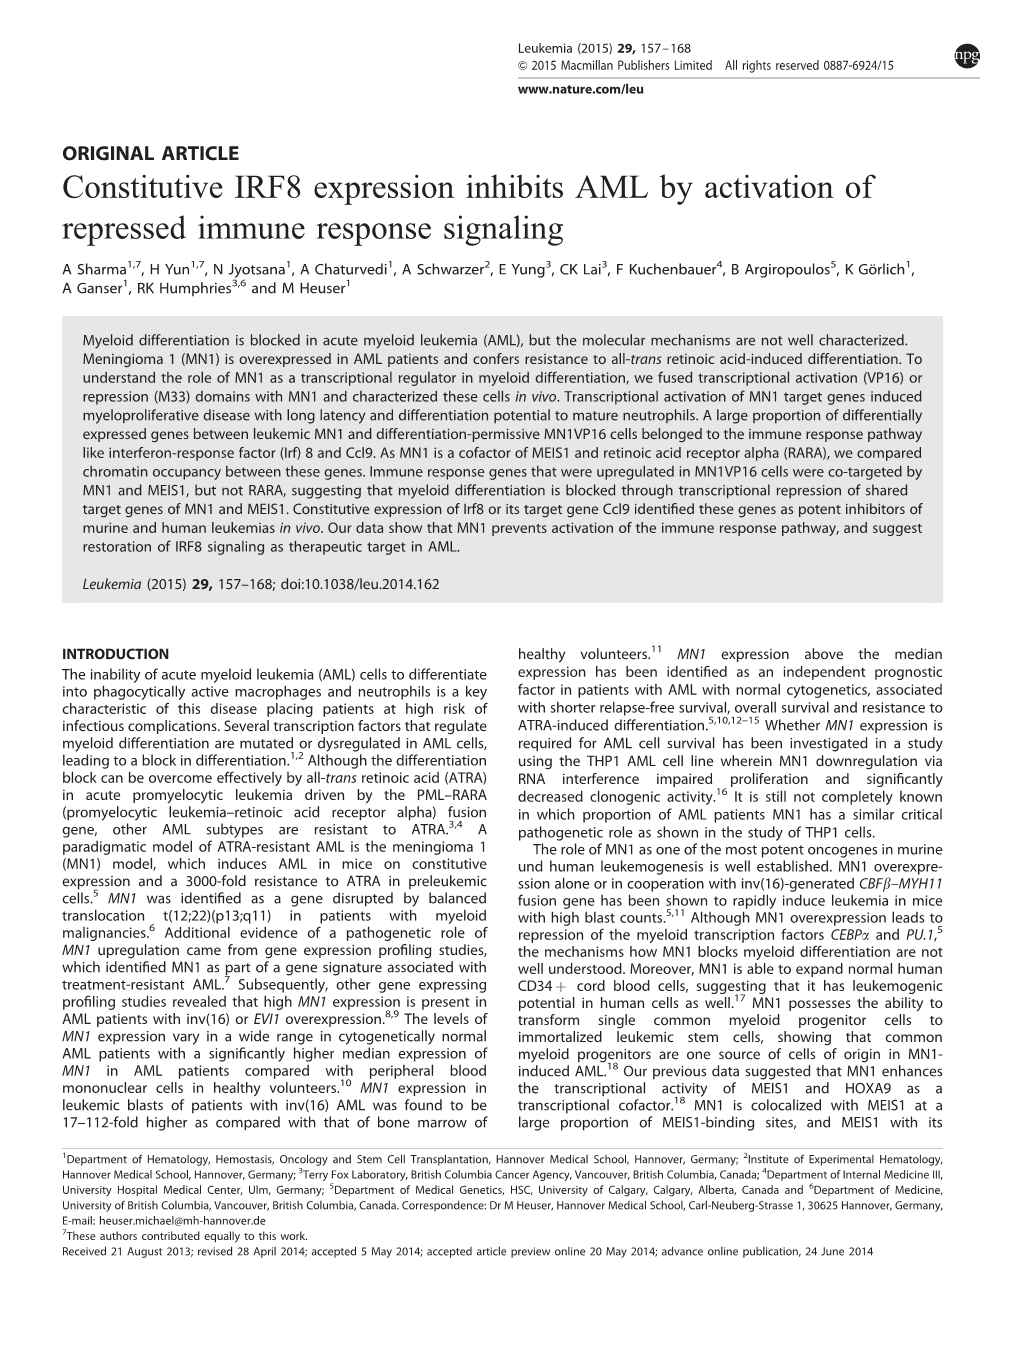 Constitutive IRF8 Expression Inhibits AML by Activation of Repressed Immune Response Signaling